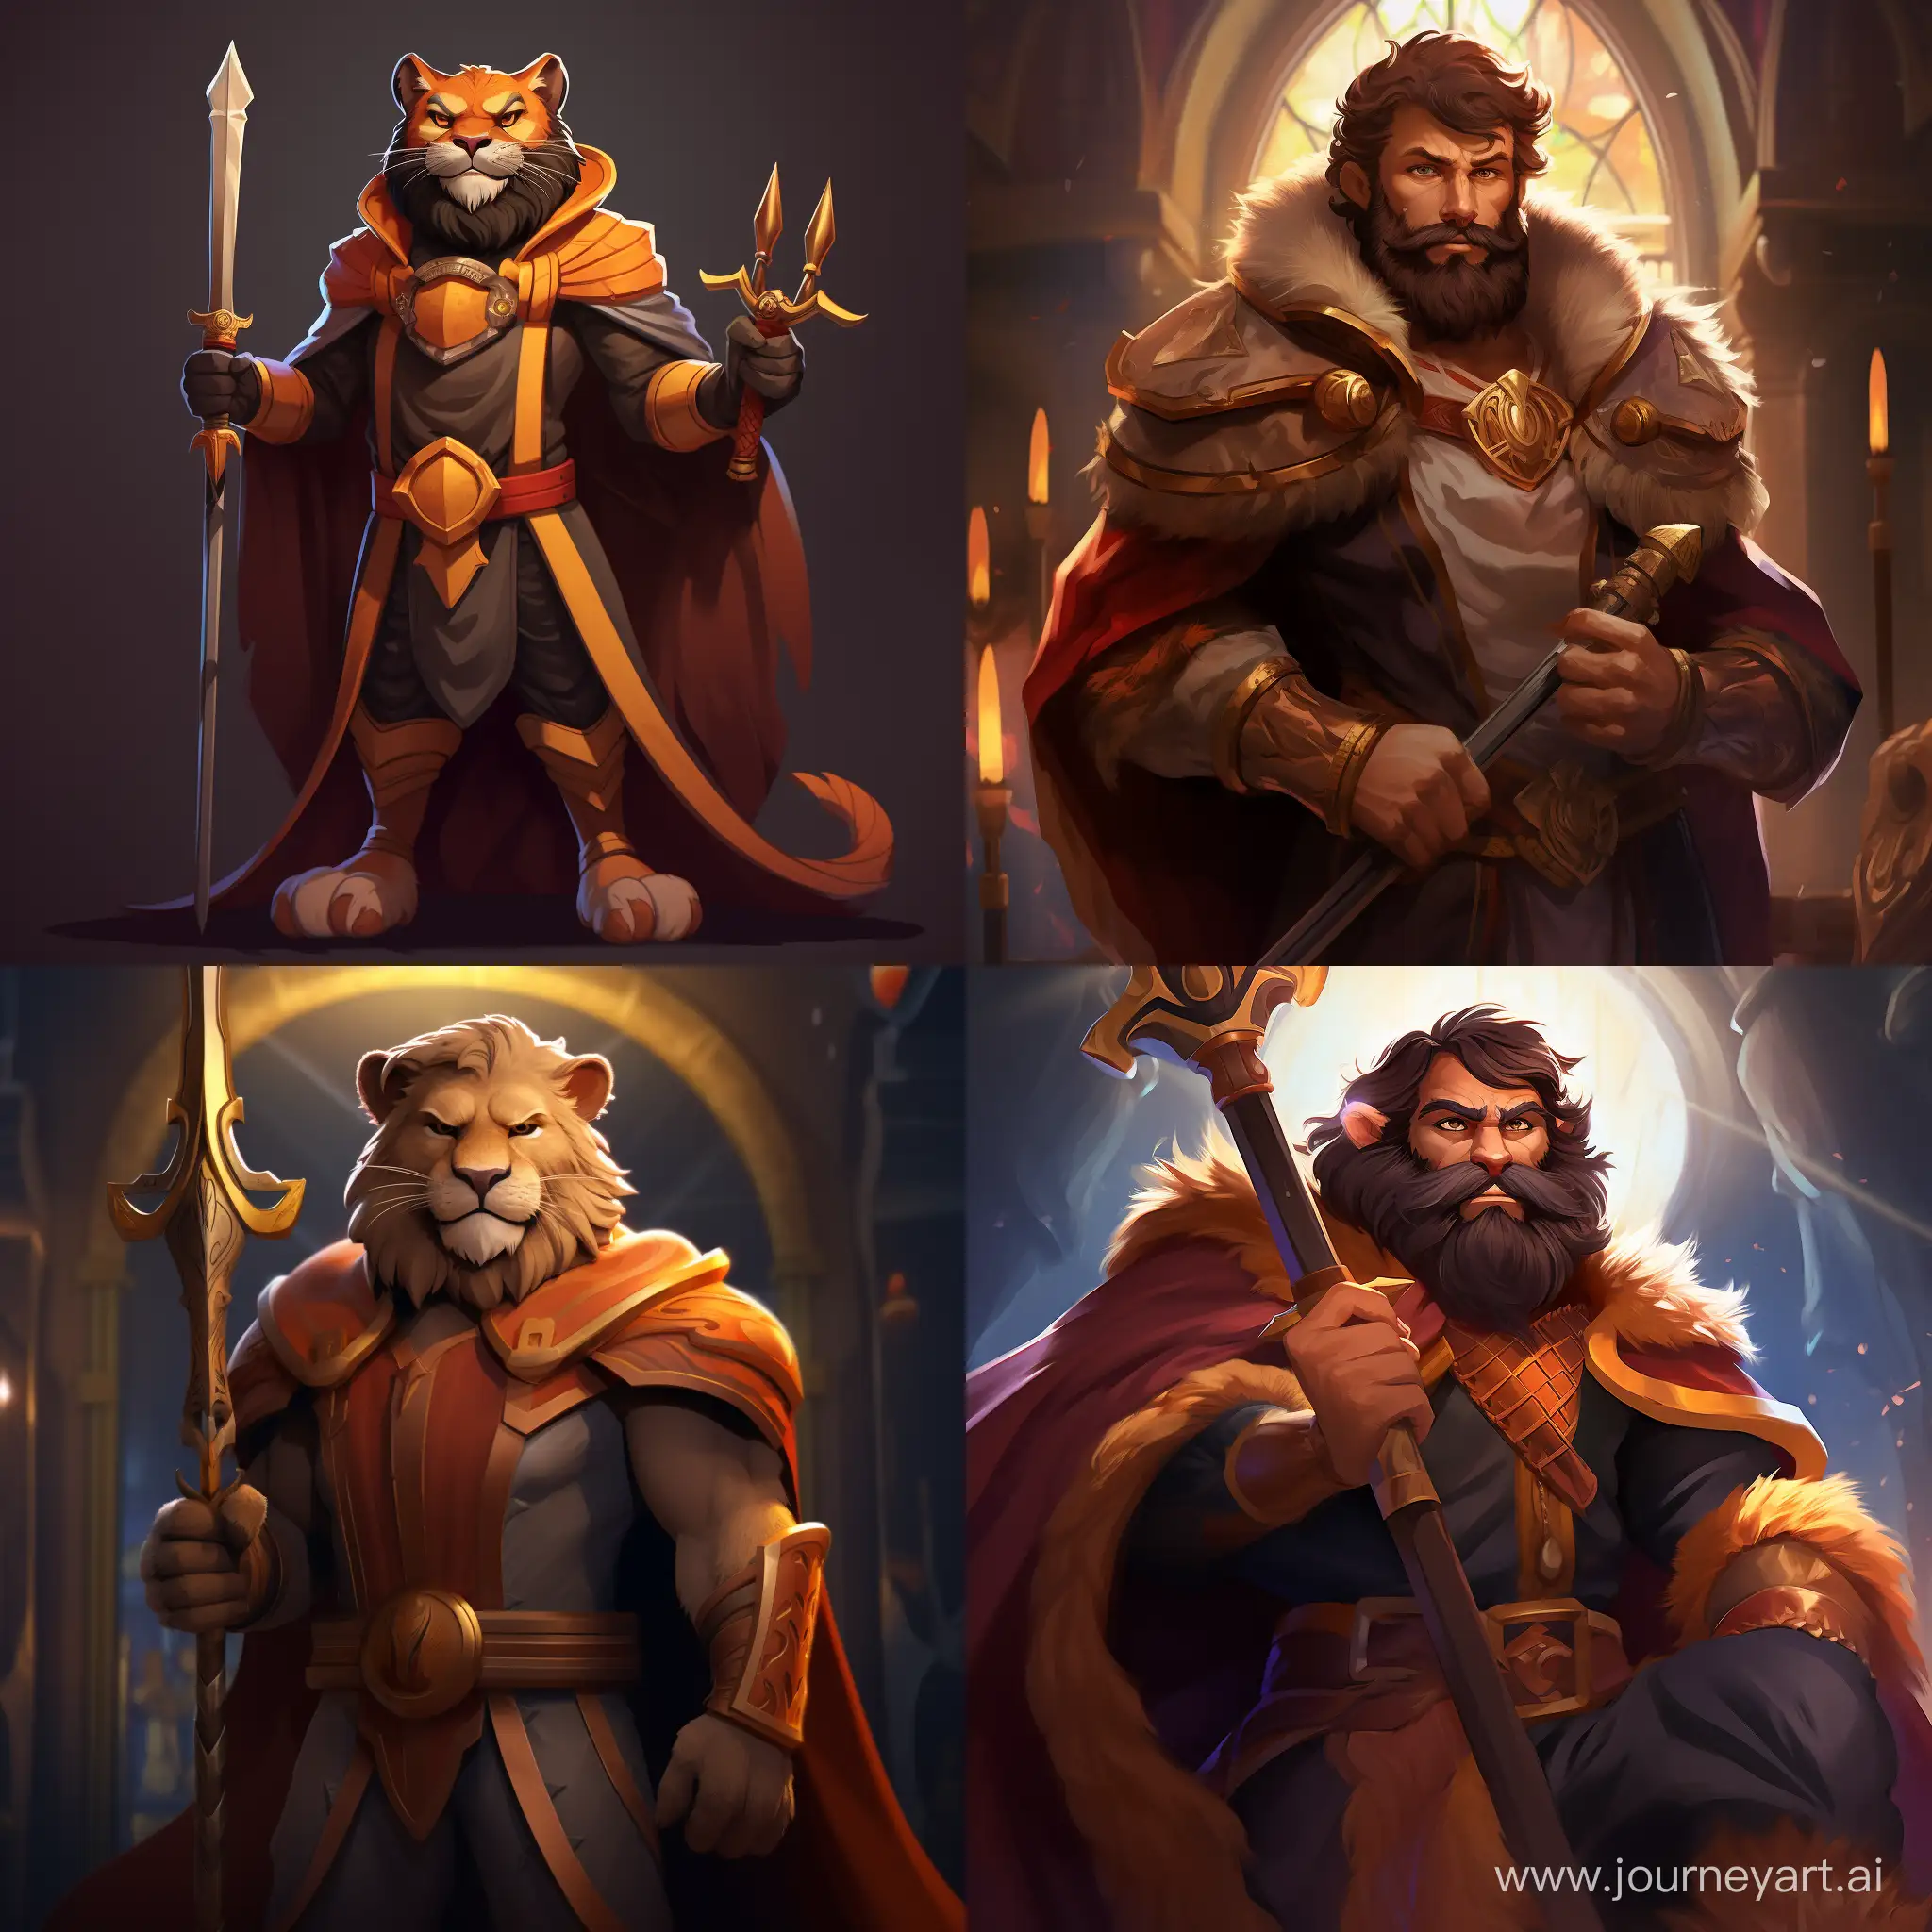 a cartoon character with a beard and a beard on his head, holding a sword and wearing a cape, concept art, regal, Altoon Sultan, furry art